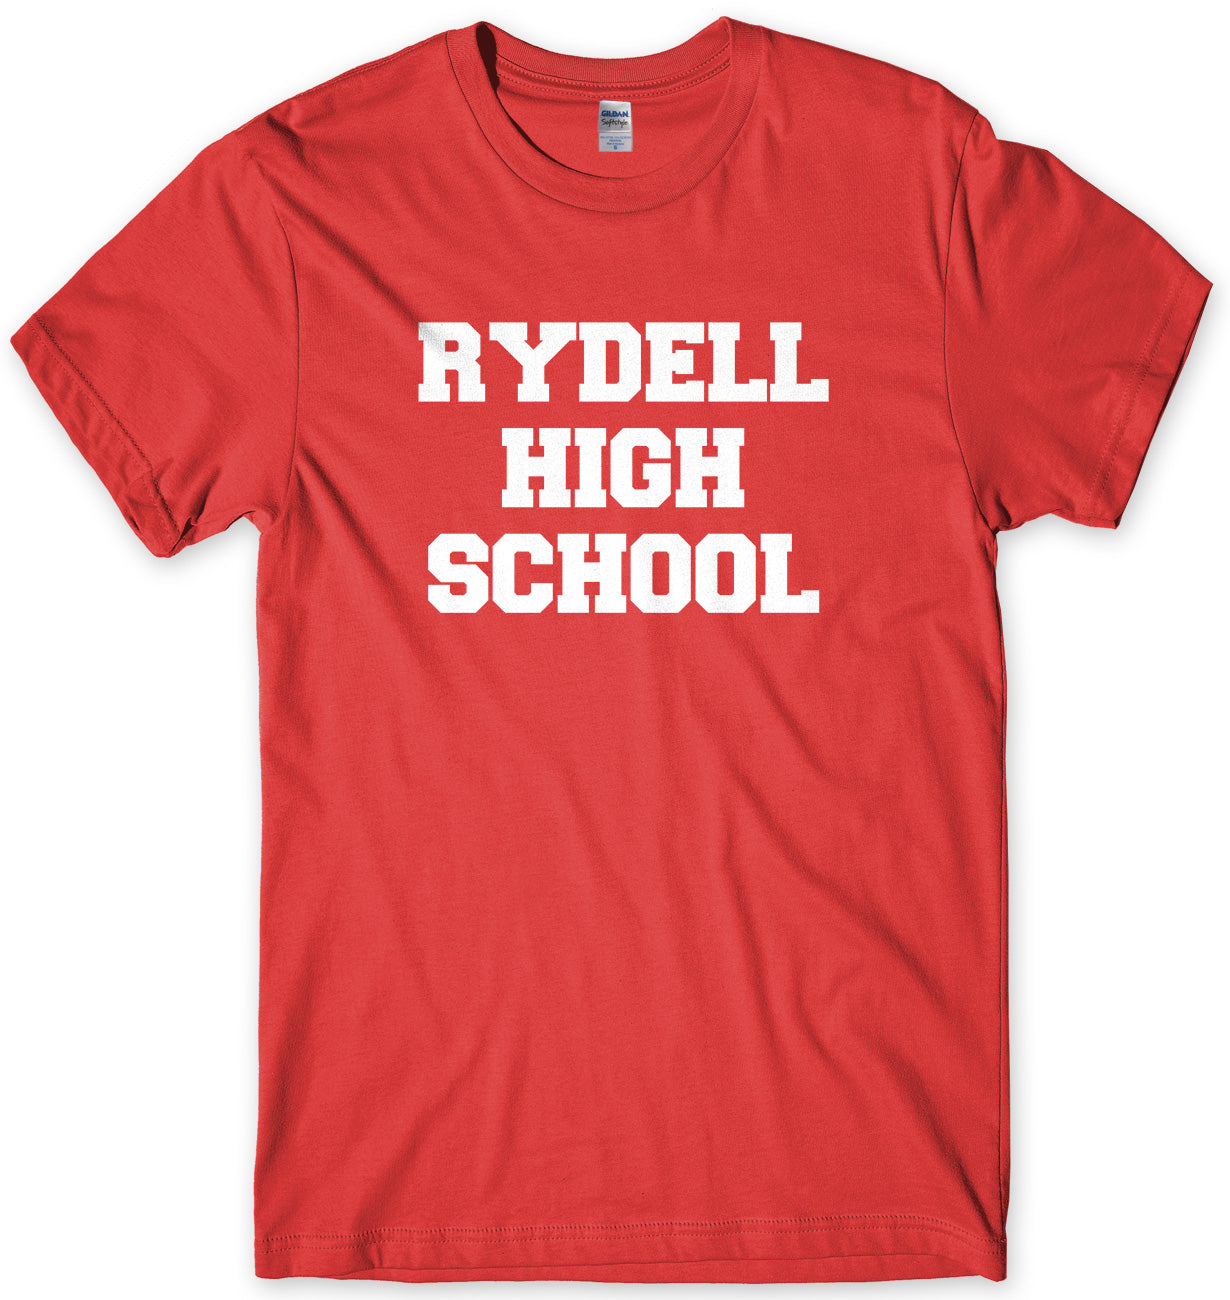 RYDELL HIGH SCHOOL - INSPIRED BY GREASE MENS UNISEX T-SHIRT